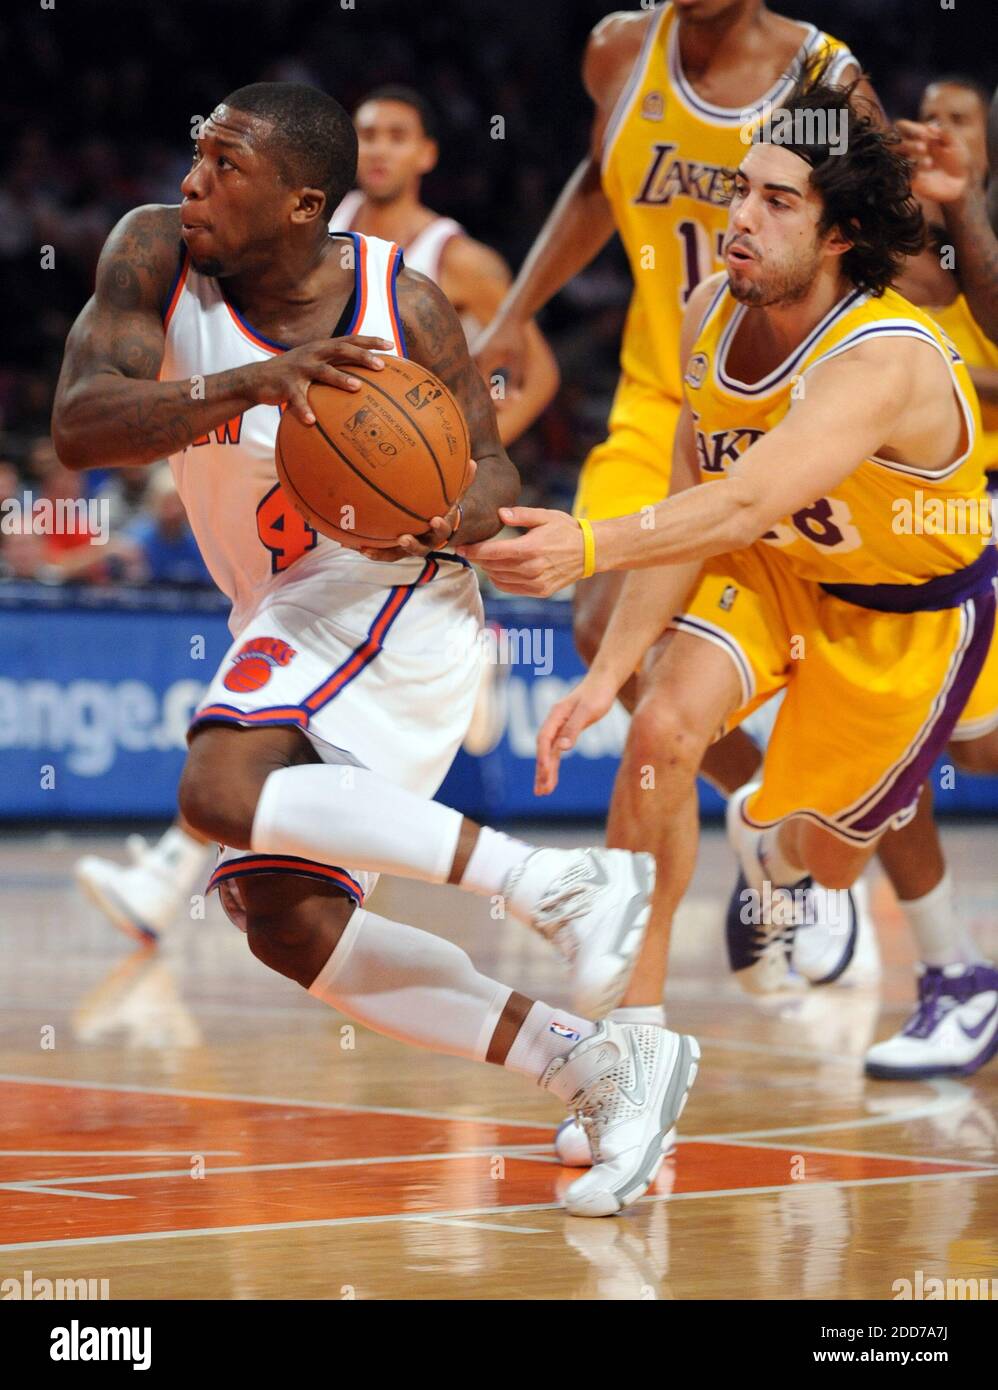 NO FILM, NO VIDEO, NO TV, NO DOCUMENTARY - The New York Knicks' Nate Robinson drives to the basket past the Los Angeles Lakers' Sasha Vujacic (right) in the first quarter at Madison Square Garden in New York City, NY, USA on December 23, 2007. The Lakers defeated the Knicks, 95-90. Photo by J. Conrad Williams Jr./Newsday/MCT/Cameleon/ABACAPRESS.COM Stock Photo